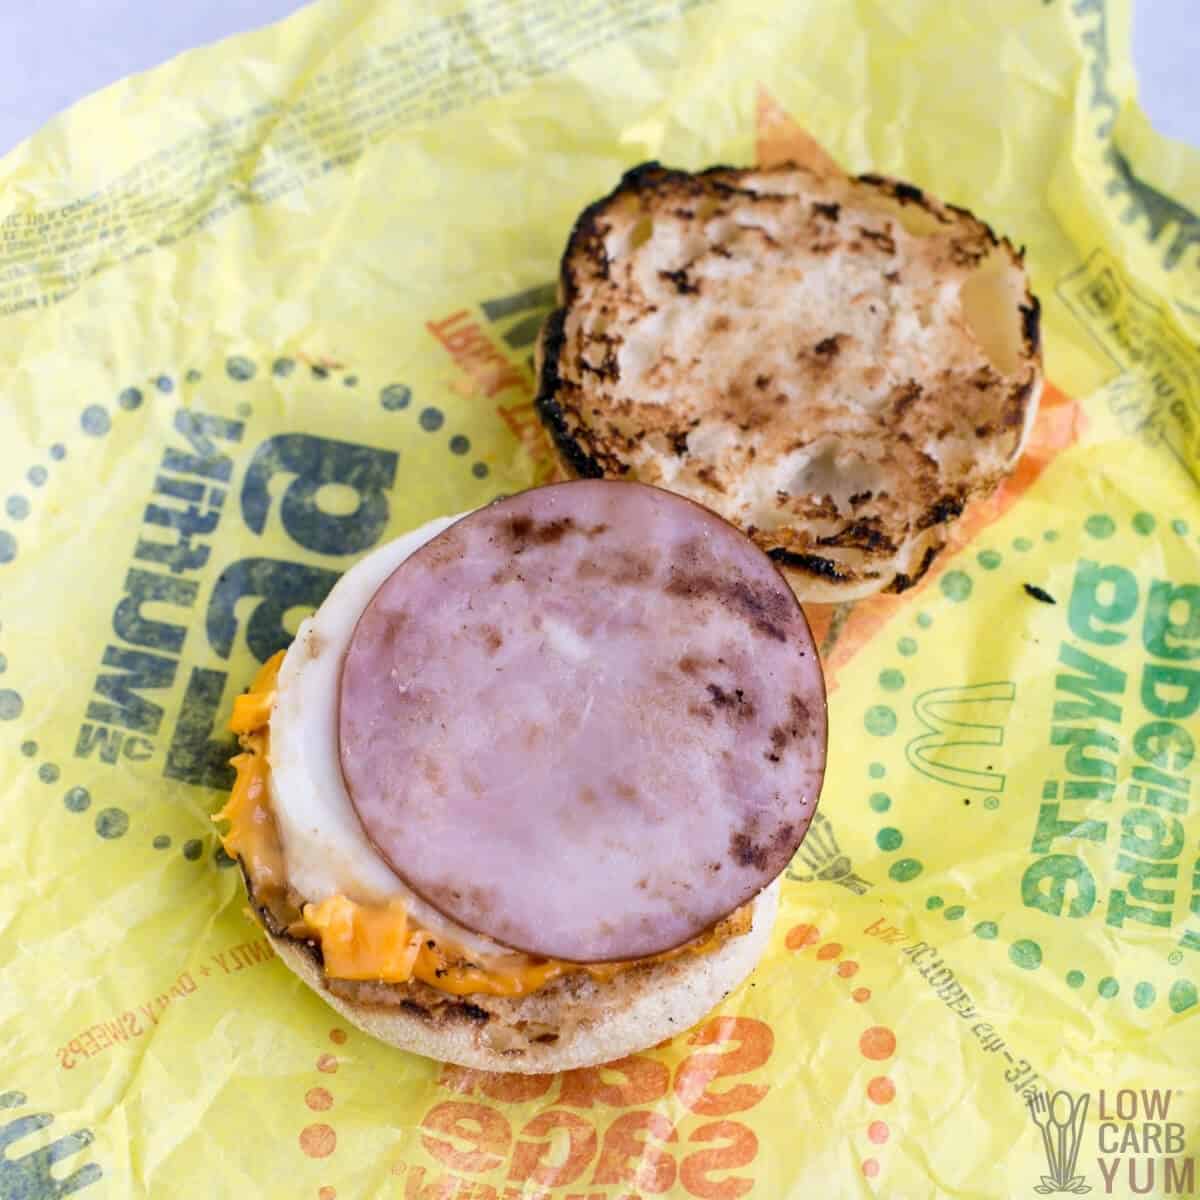 low carb keto inside of mcdonalds egg mcmuffin